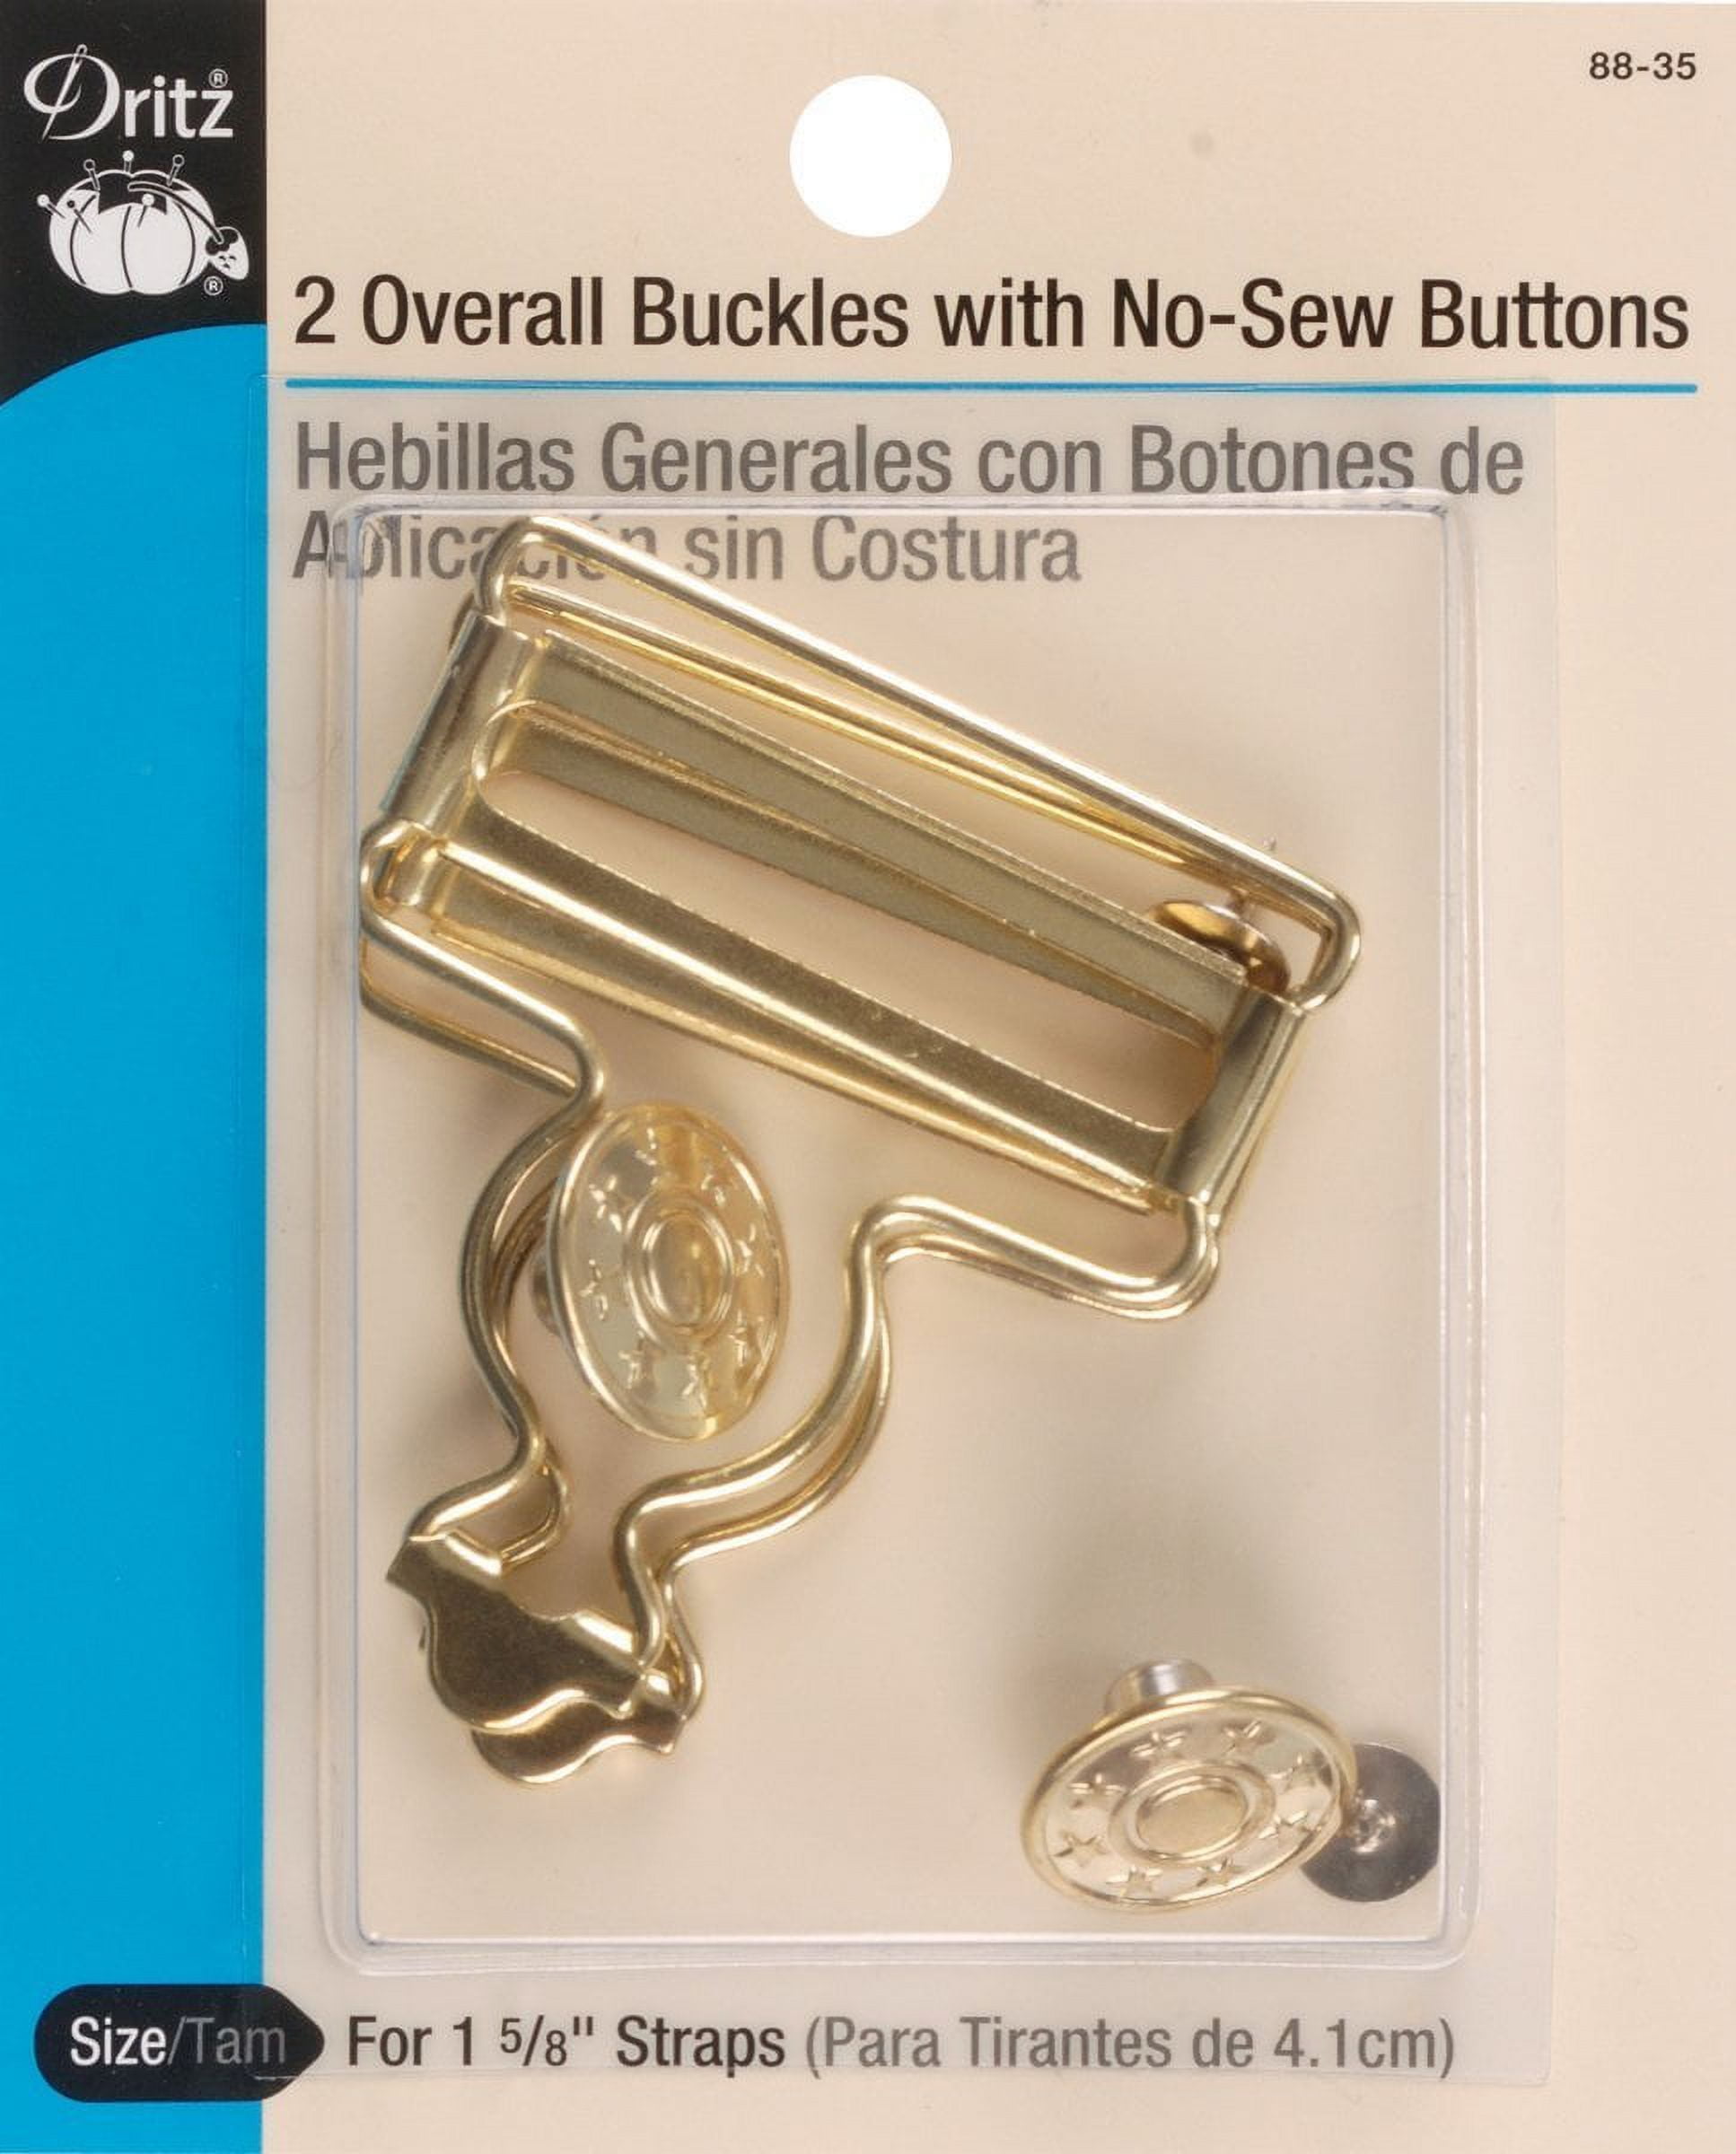 Easy to clean and machine washable Dritz 1-1/4 Overall Buckles With No-Sew  Buttons the perfect gift